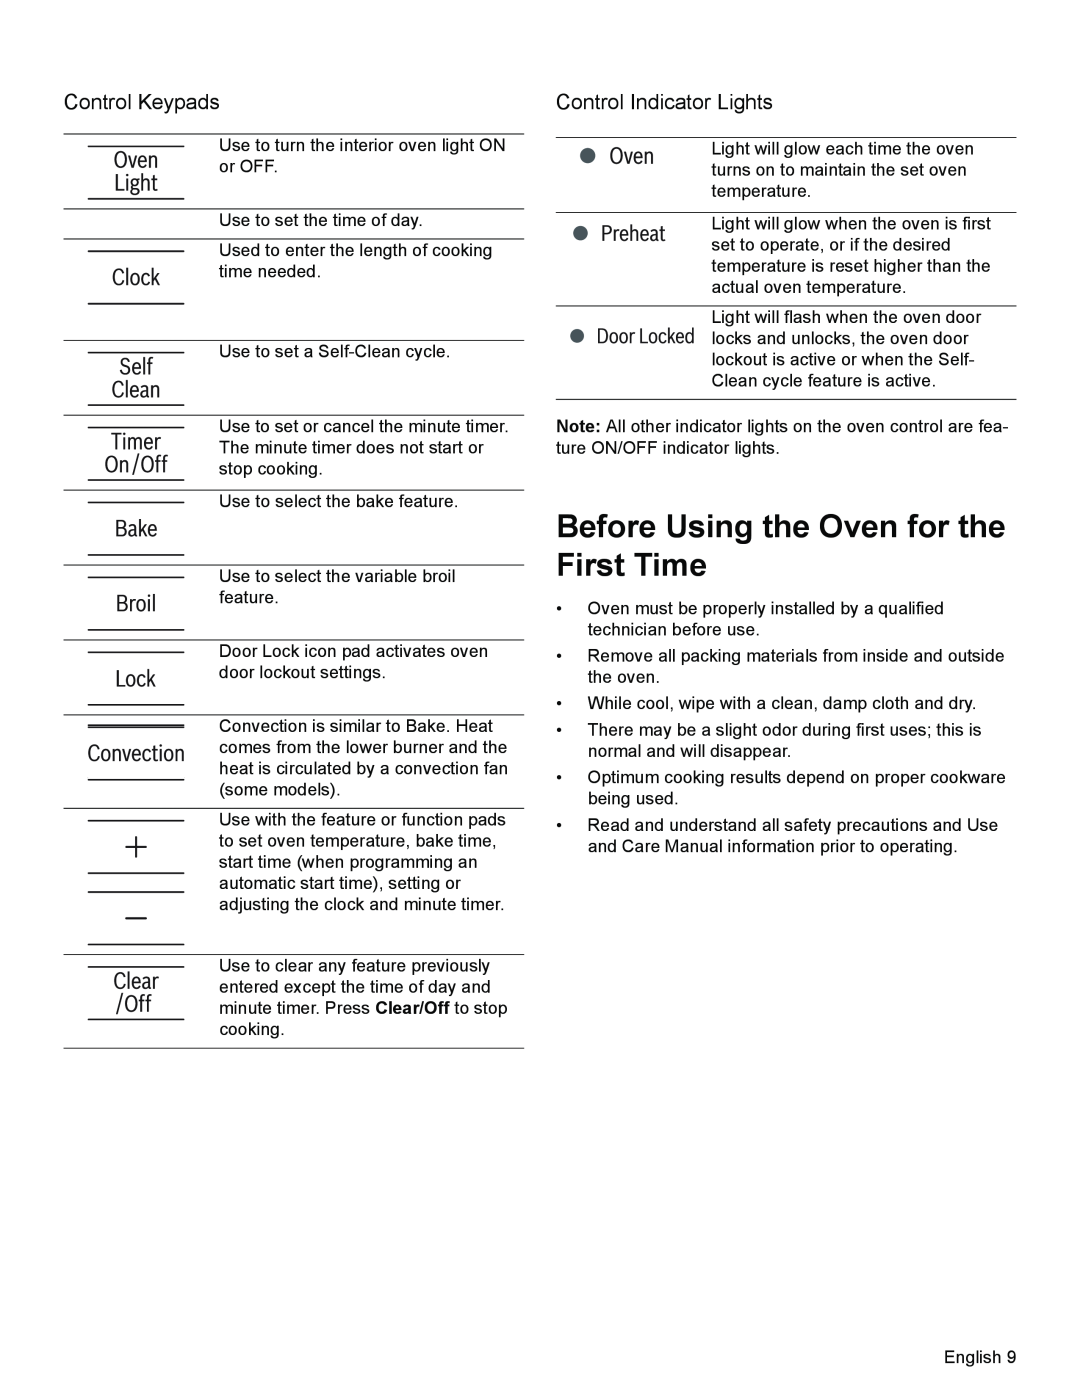 Bosch Appliances HGS3023UC manual Before Using the Oven for the First Time, Control Keypads, Control Indicator Lights 